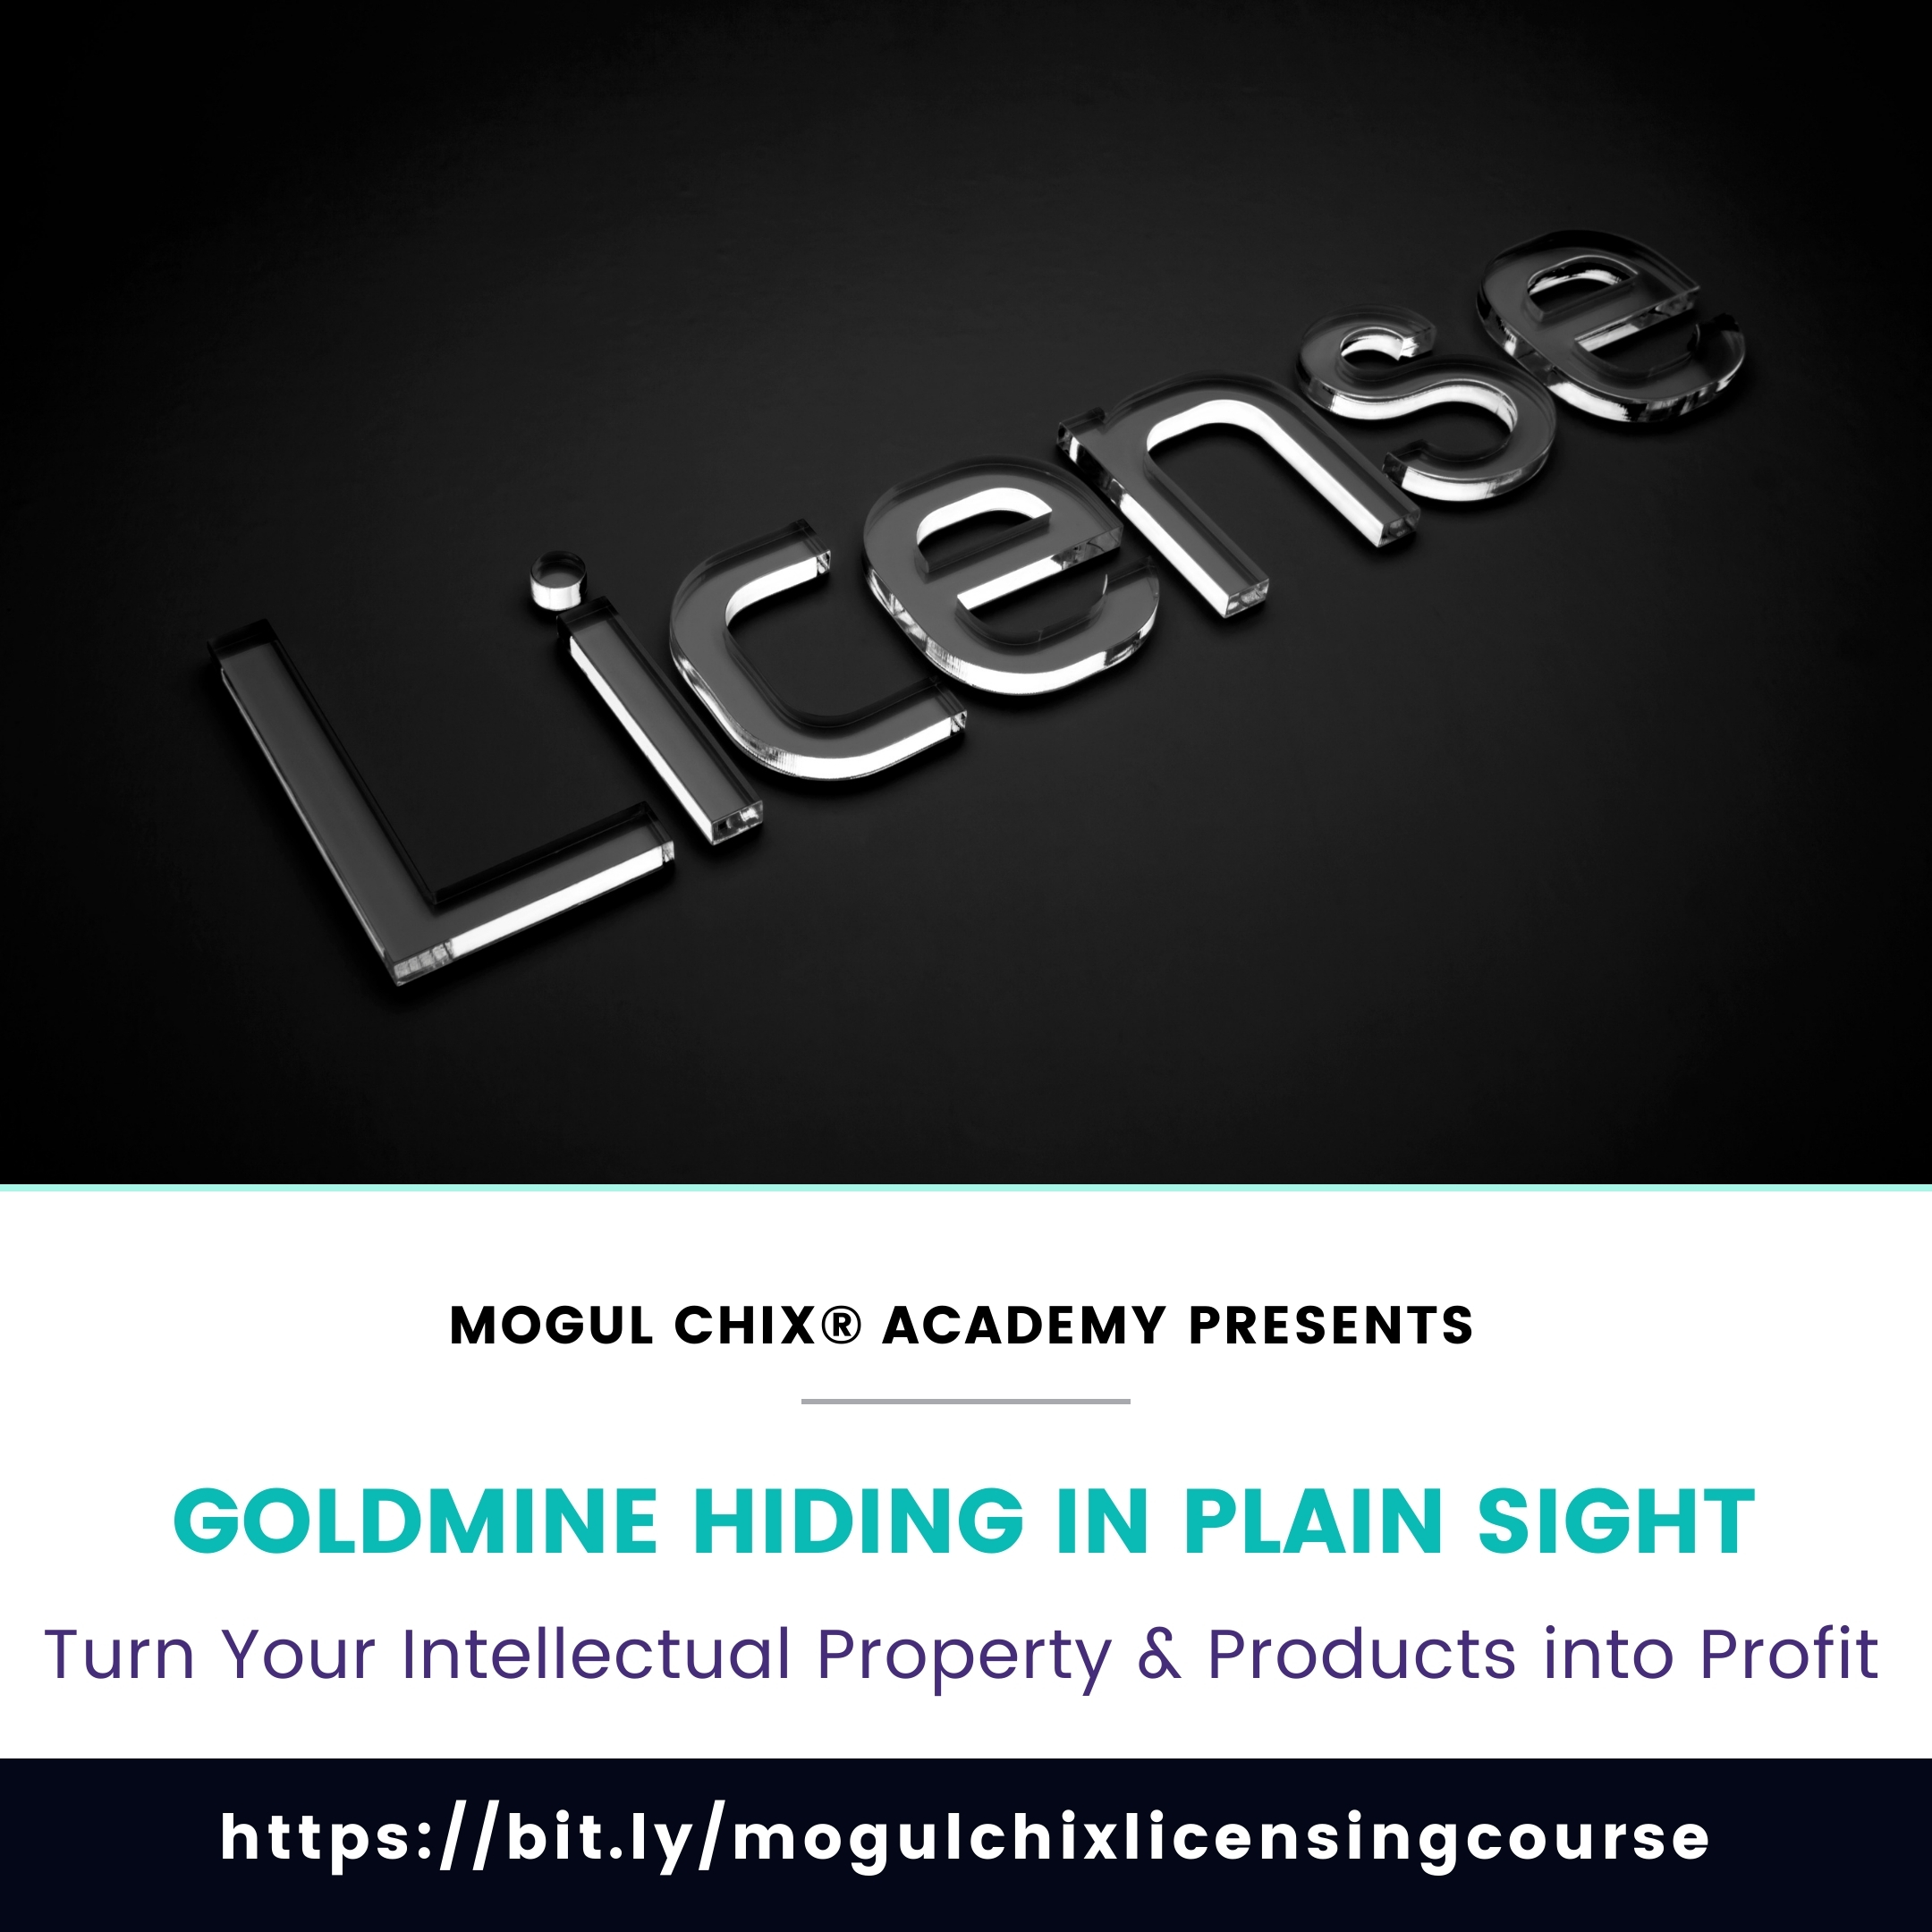 Goldmine Hiding in Plain Sight- Turn Your Intellectual Property & Products Into Profit. Mogul Chix® Academy